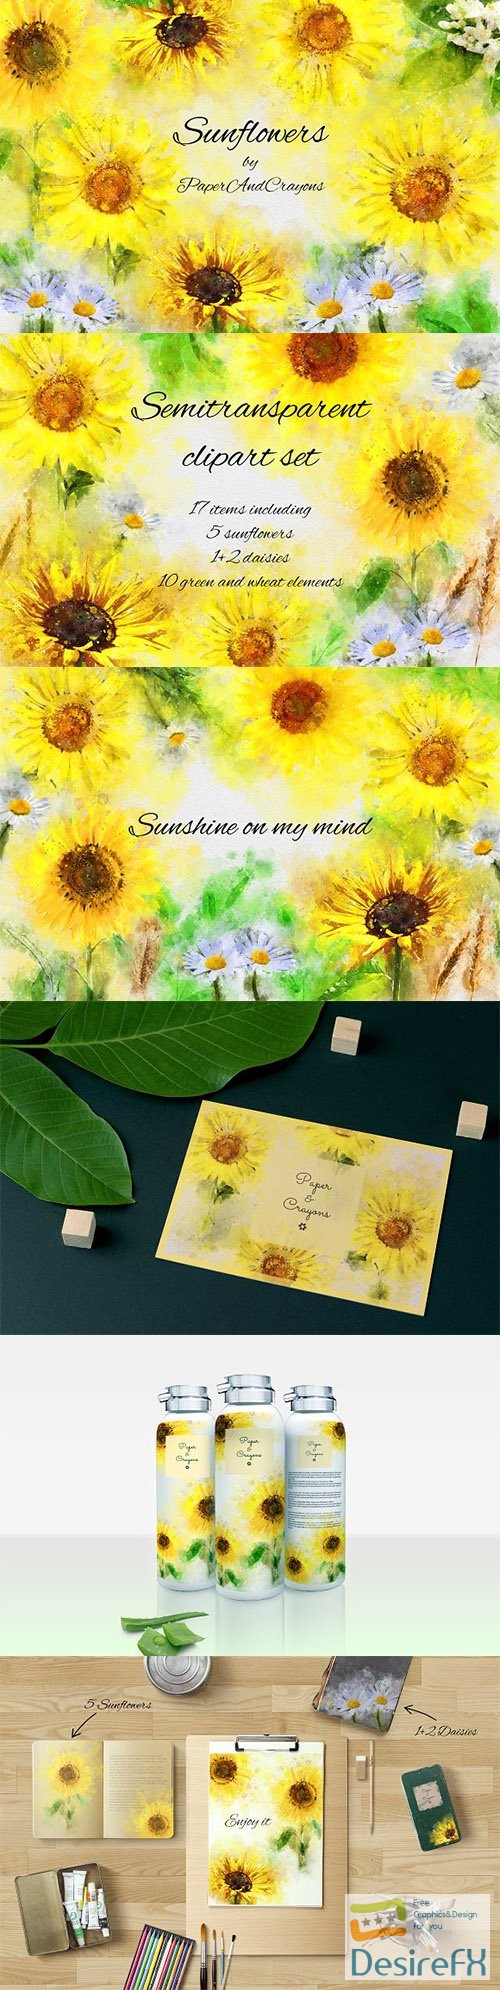 CreativeMarket - Sunflowers by PaperAndCrayons 2368970